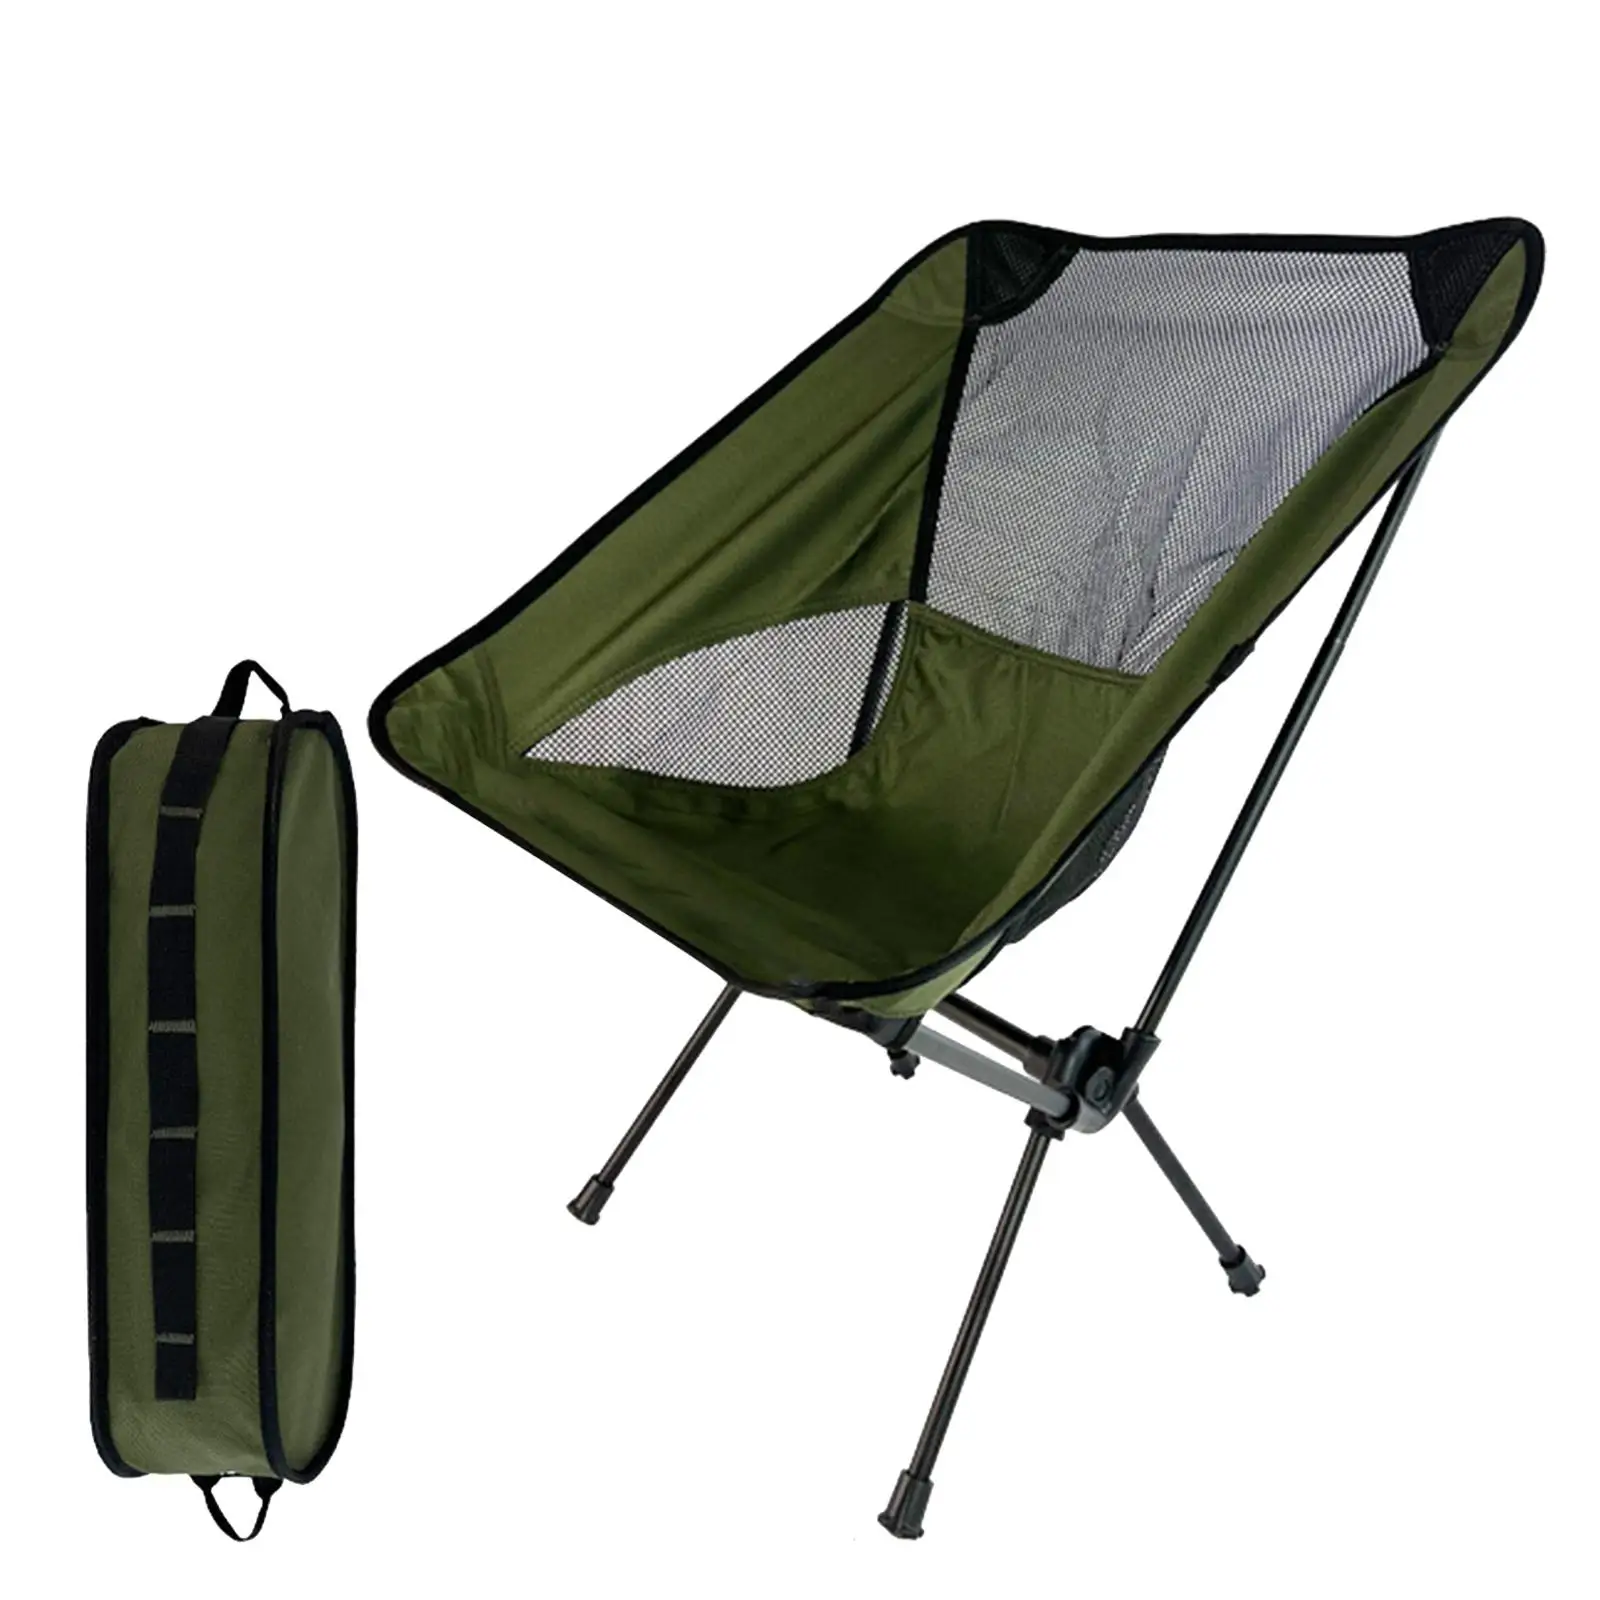 Outdoor Fishing Chair Portable Lightweight Home Garden Seat High Quality Travel Hiking Picnic Beach BBQ Folding Camping Chair